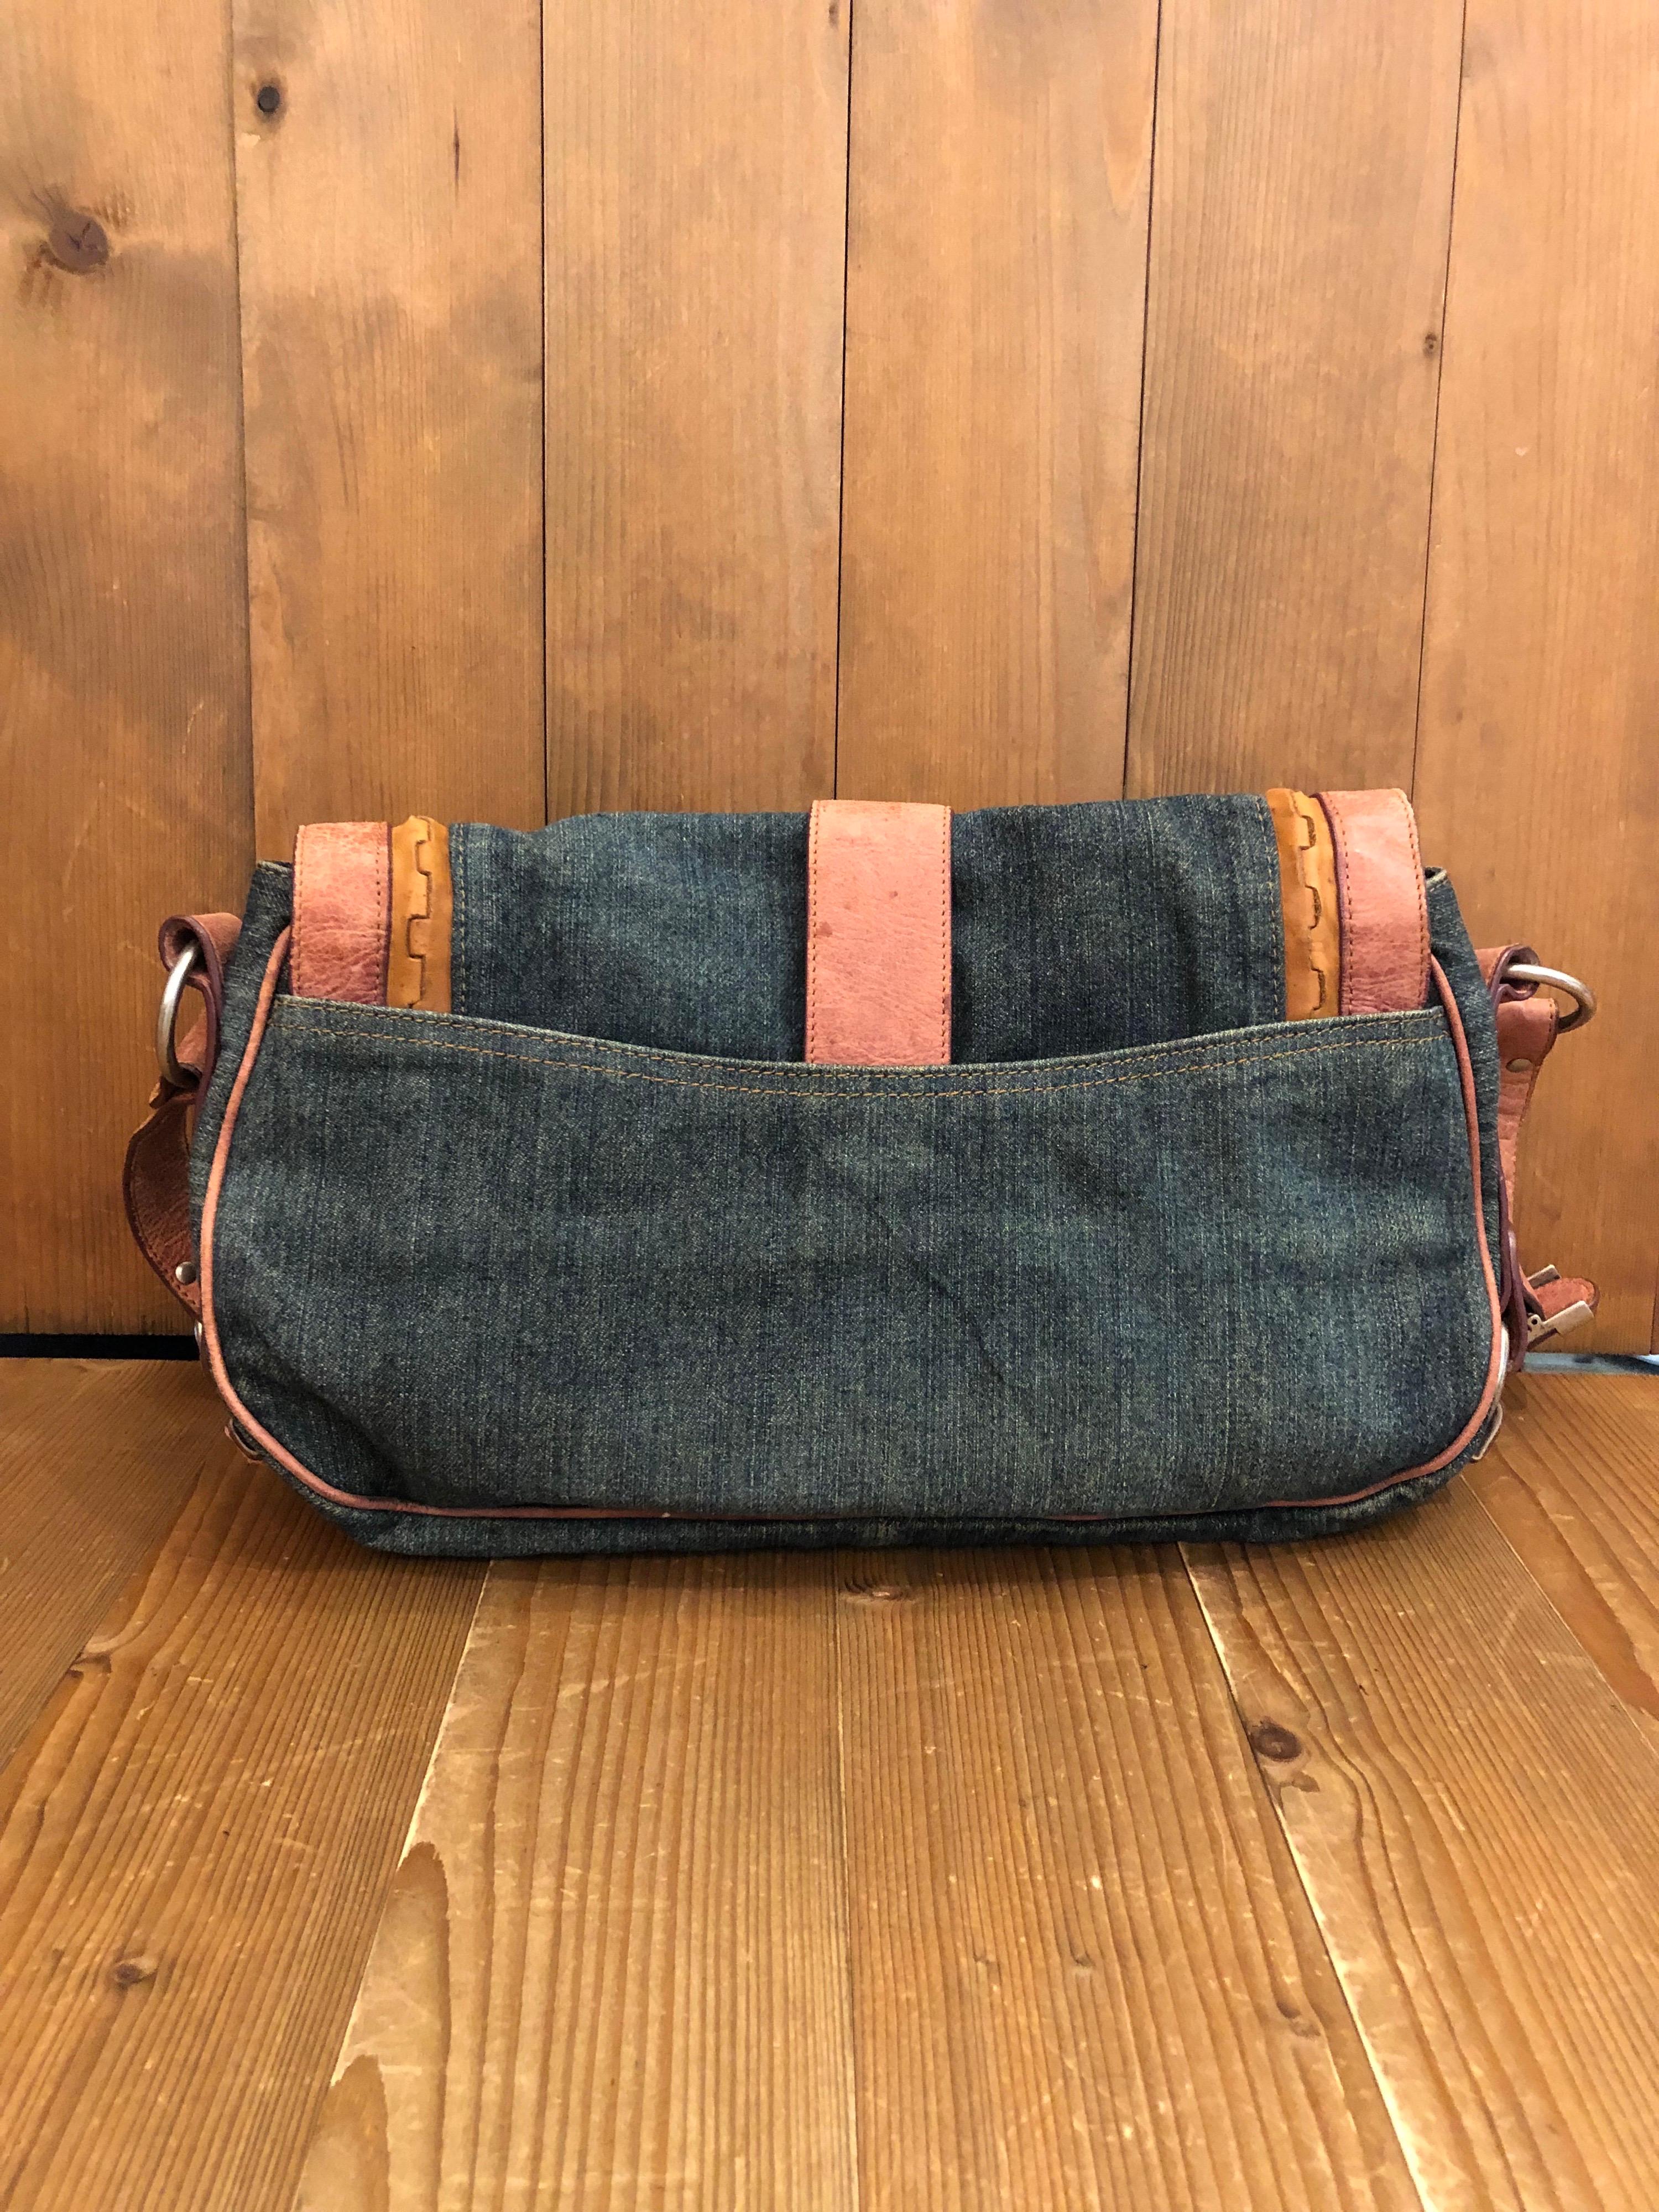 This vintage 2000s Christian Dior Gaucho Saddle shoulder bag is crafted of blue denim and brown leather featuring one interior zippered pocket and one back open pocket. Made in Italy. Measures 13 x 9 x 3.5 Strap drop 11 inches. 

Condition: Signs of